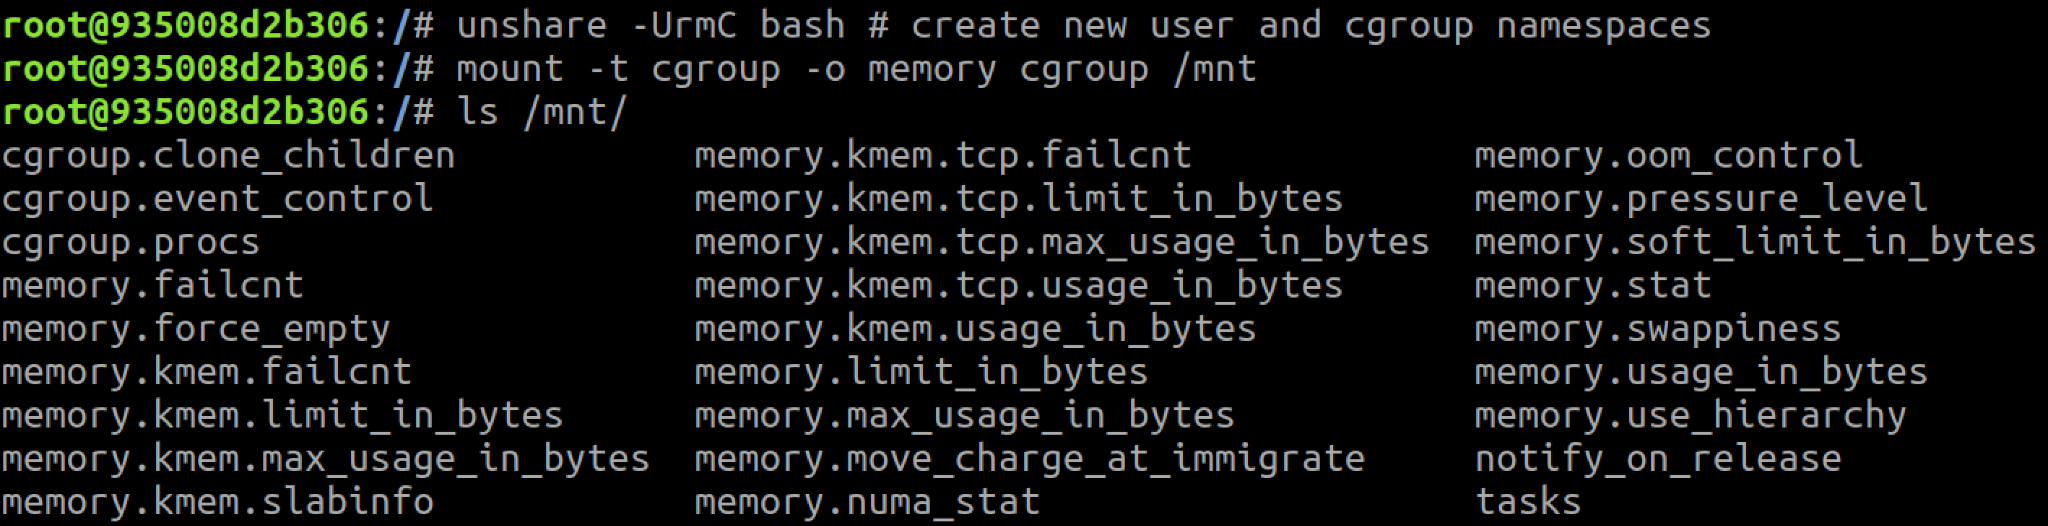 The container mounts the memory cgroup in the new user and cgroup namespaces.